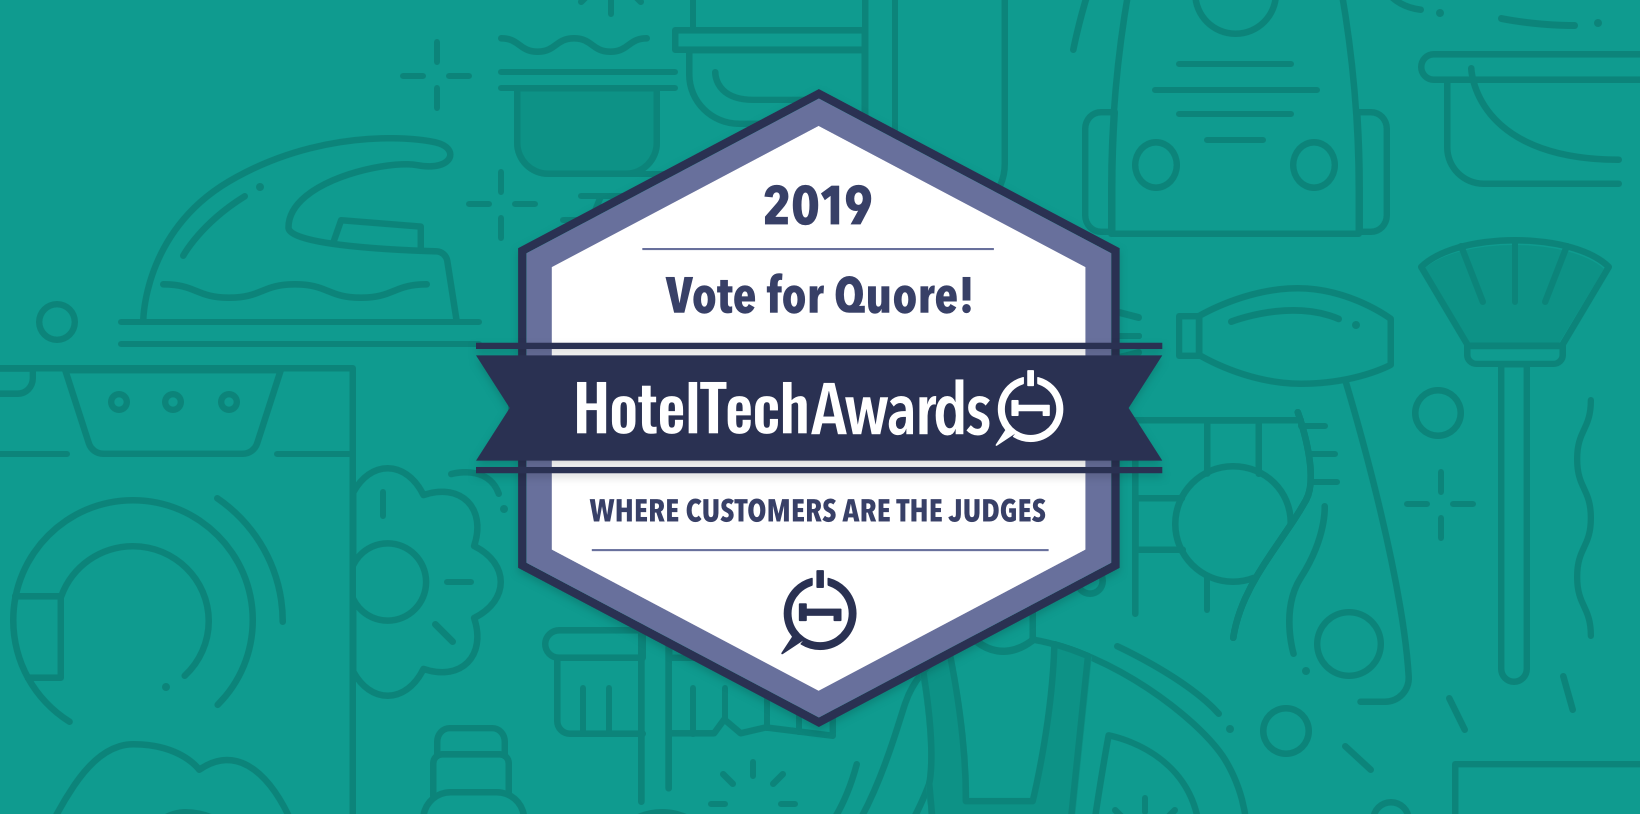 Vote for Quore in the 2019 Hotel Tech Awards!